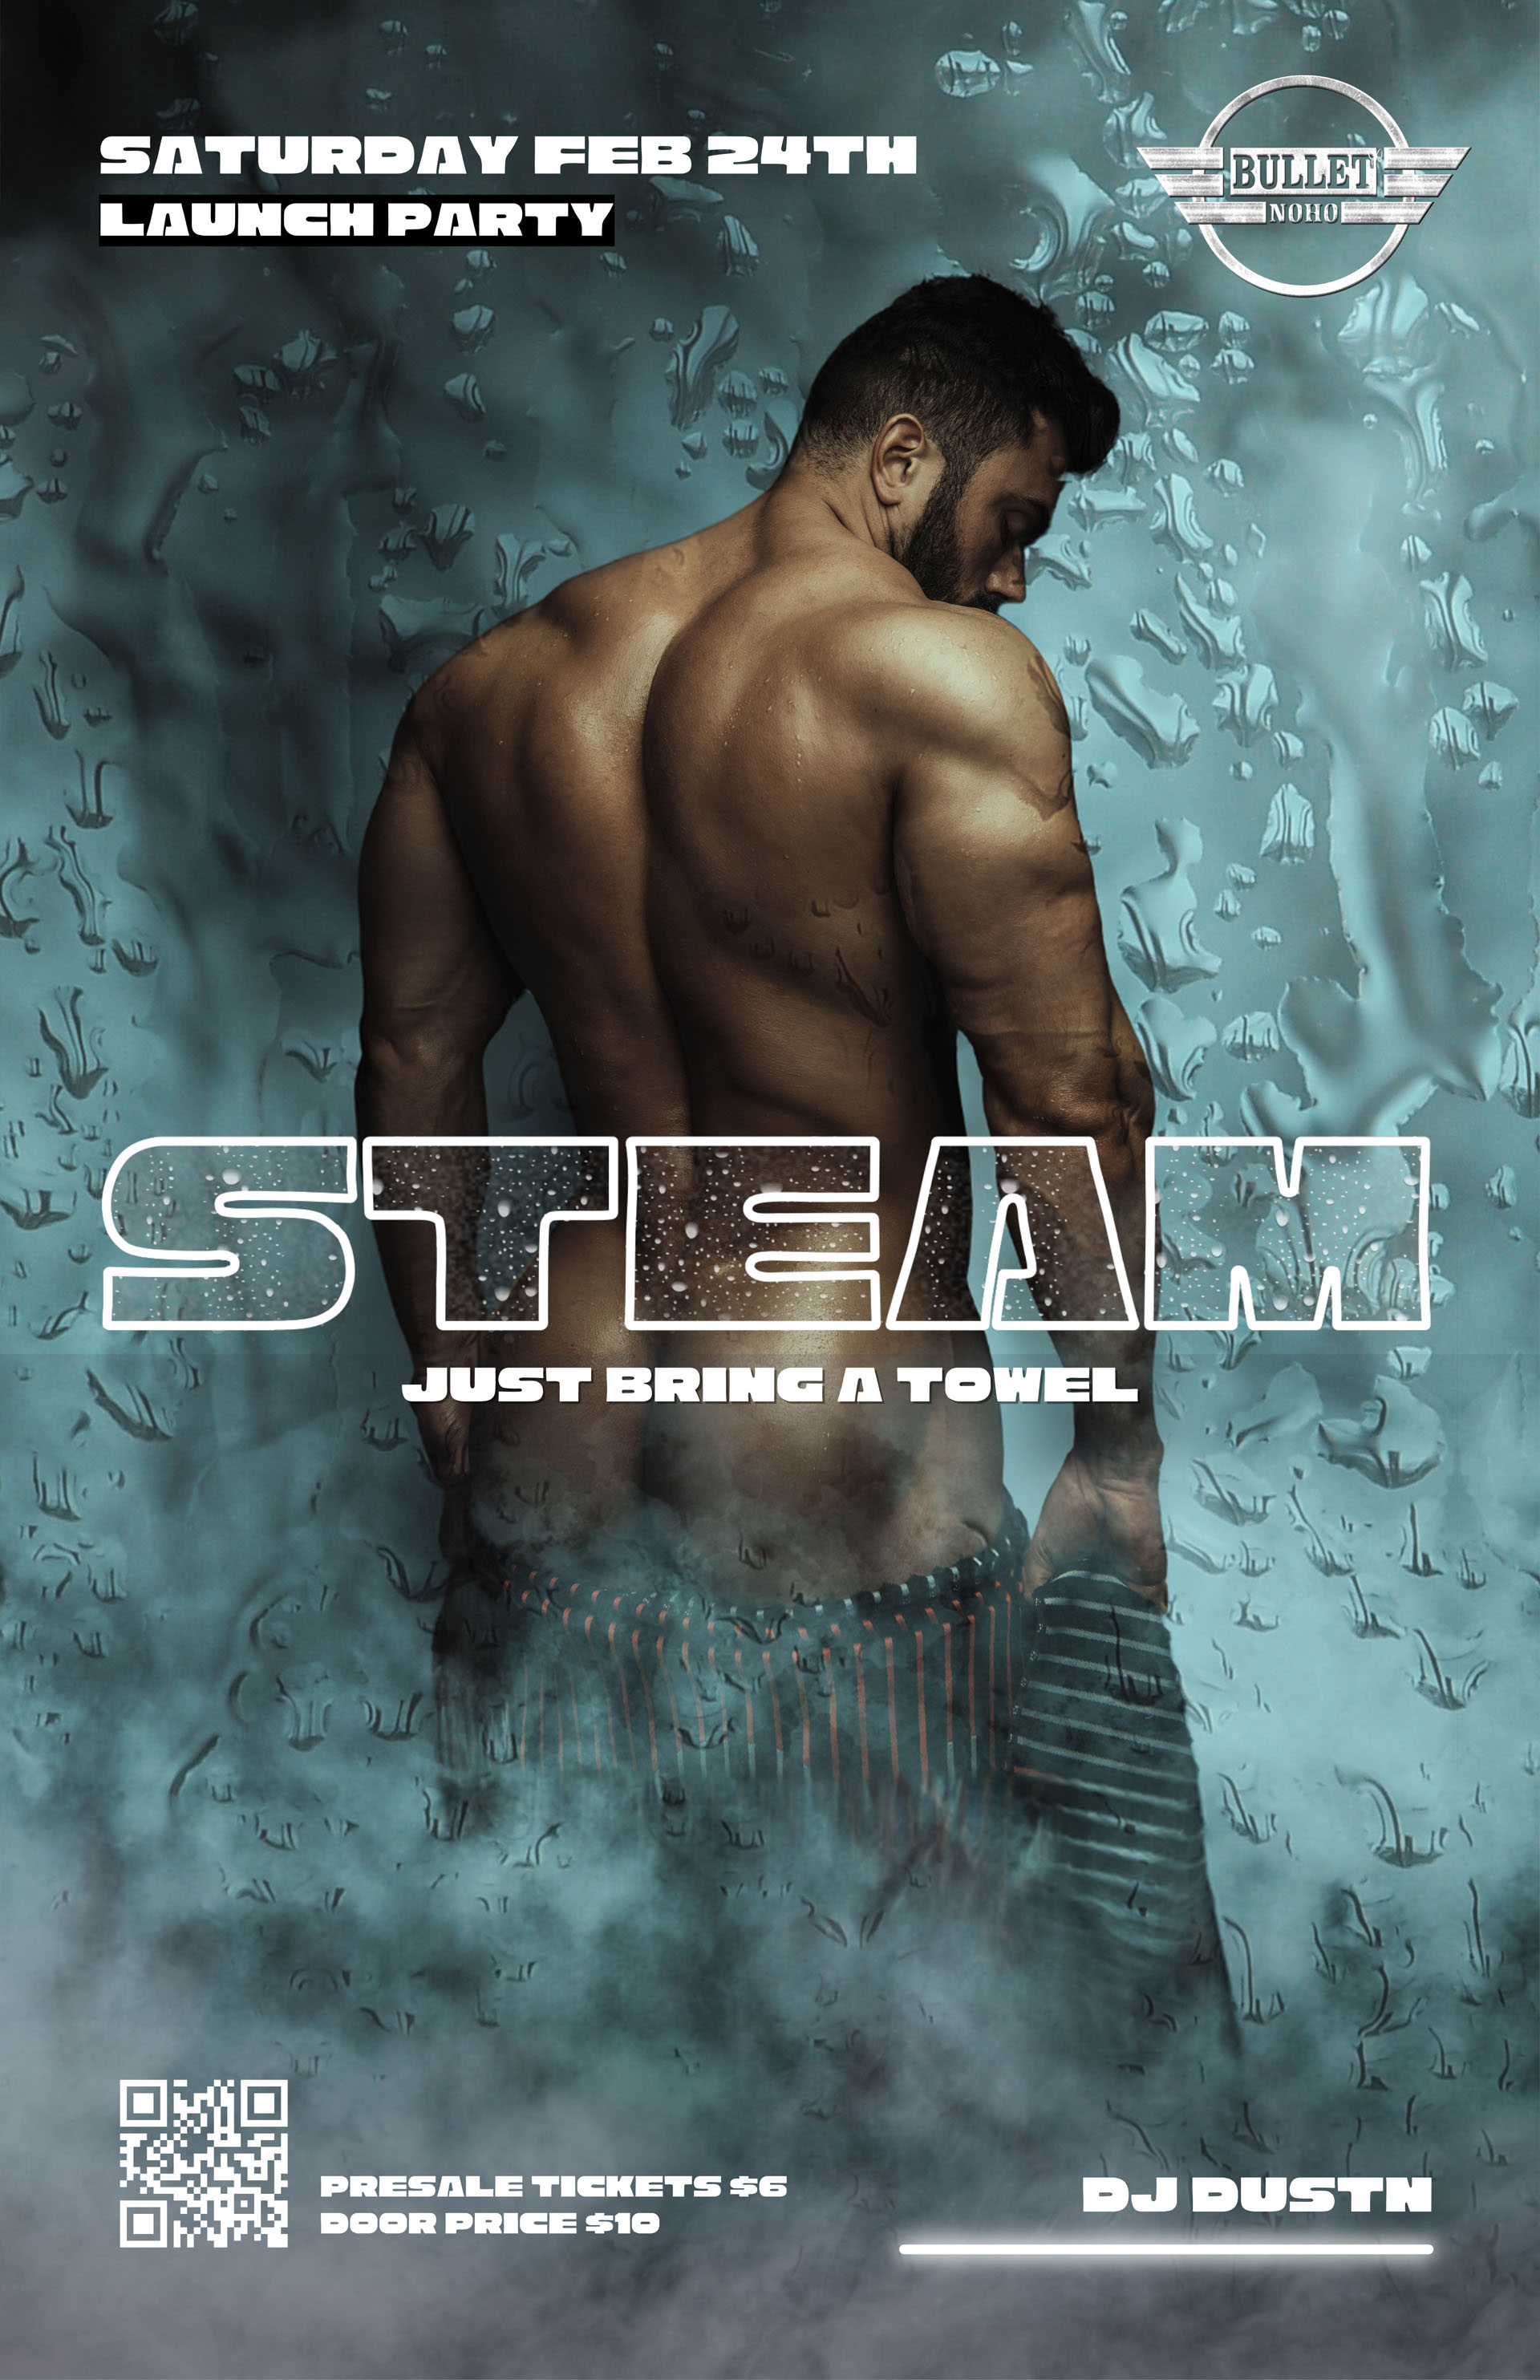 THE BULLET BAR Presents HUMP EVENTS STEAM PARTY LA Hosted by COLE CONNOR: Saturday, 02/24/24 at 9:00 PM. GoGos, special guests, an extended party area and much more! Featuring the pulsating beats by DJ DUSTN! A free coat check is available, and limited towels are for sale. Presale Tickets $6, or Door Cover $10. Presales: https://humpevents.com/steam-party